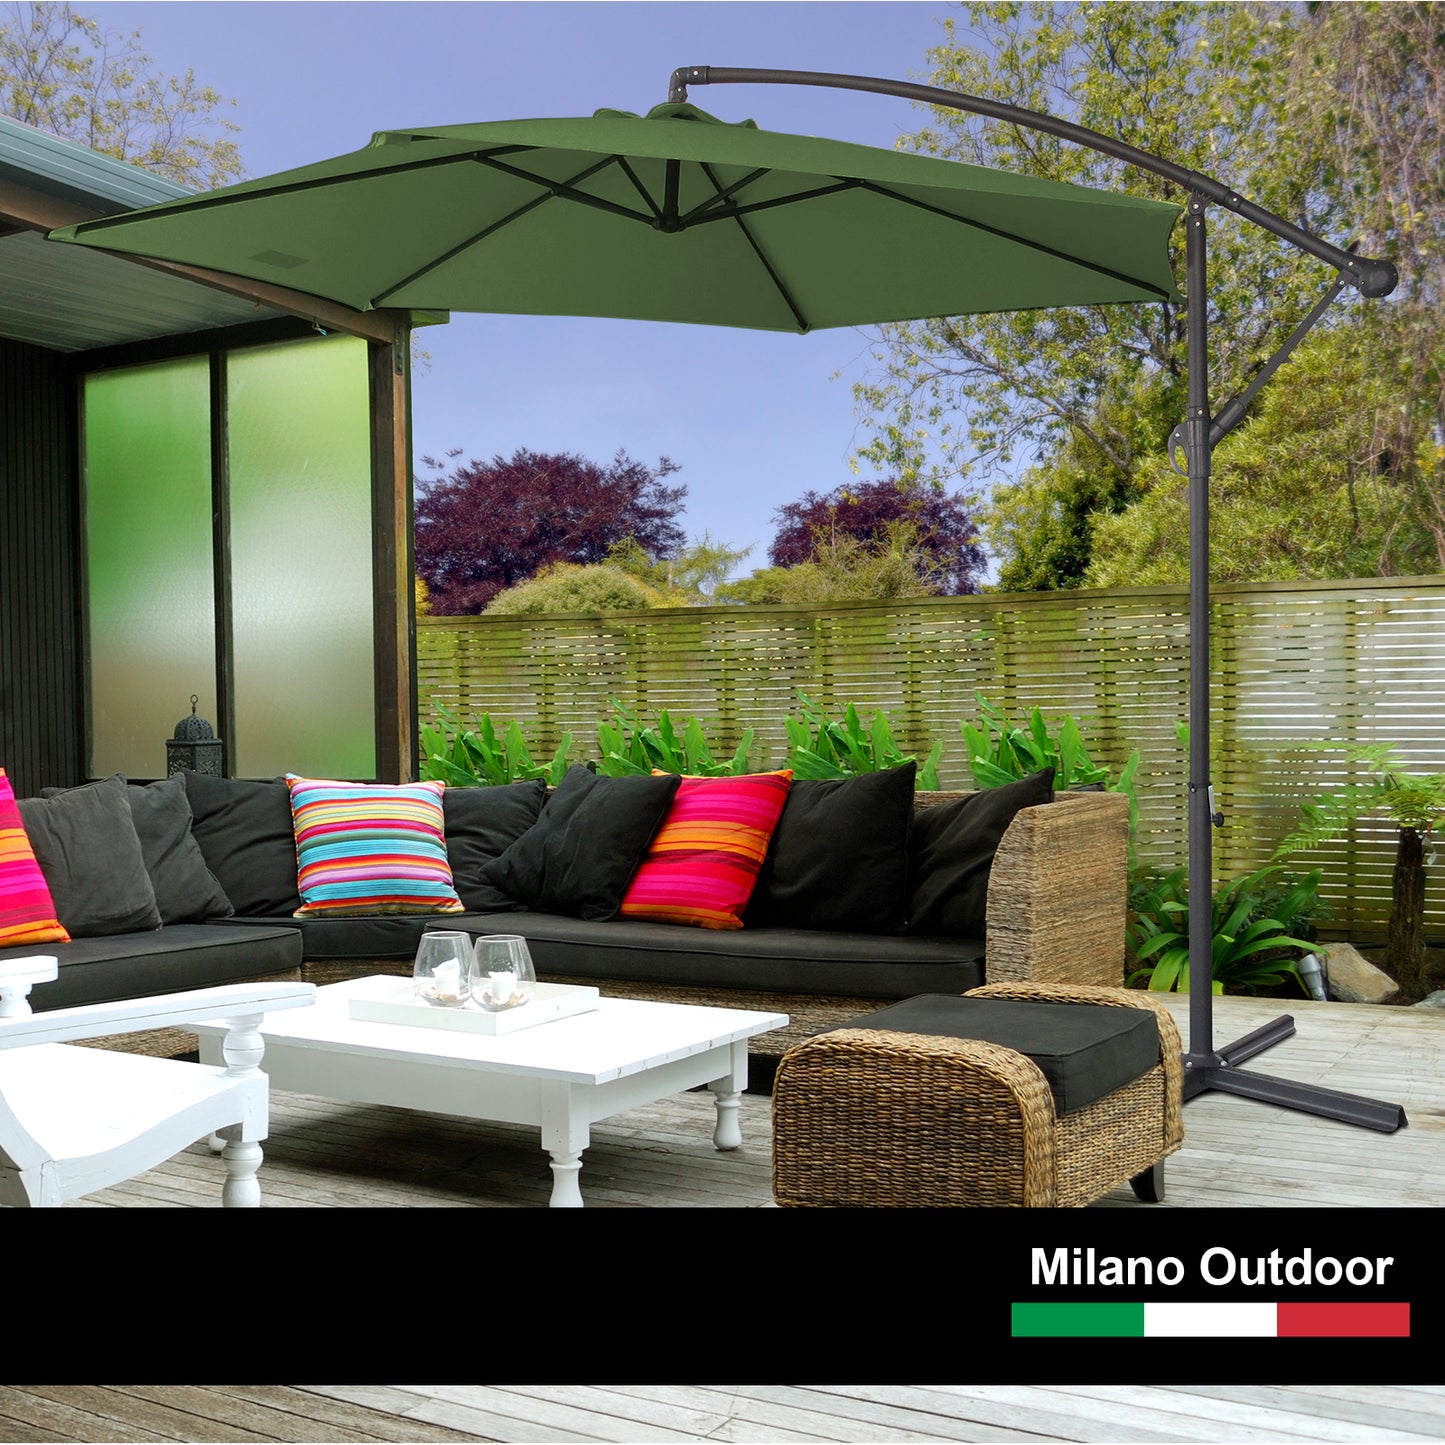 3m Makawao Outdoor Umbrella Hanging and Folding with Base - Green